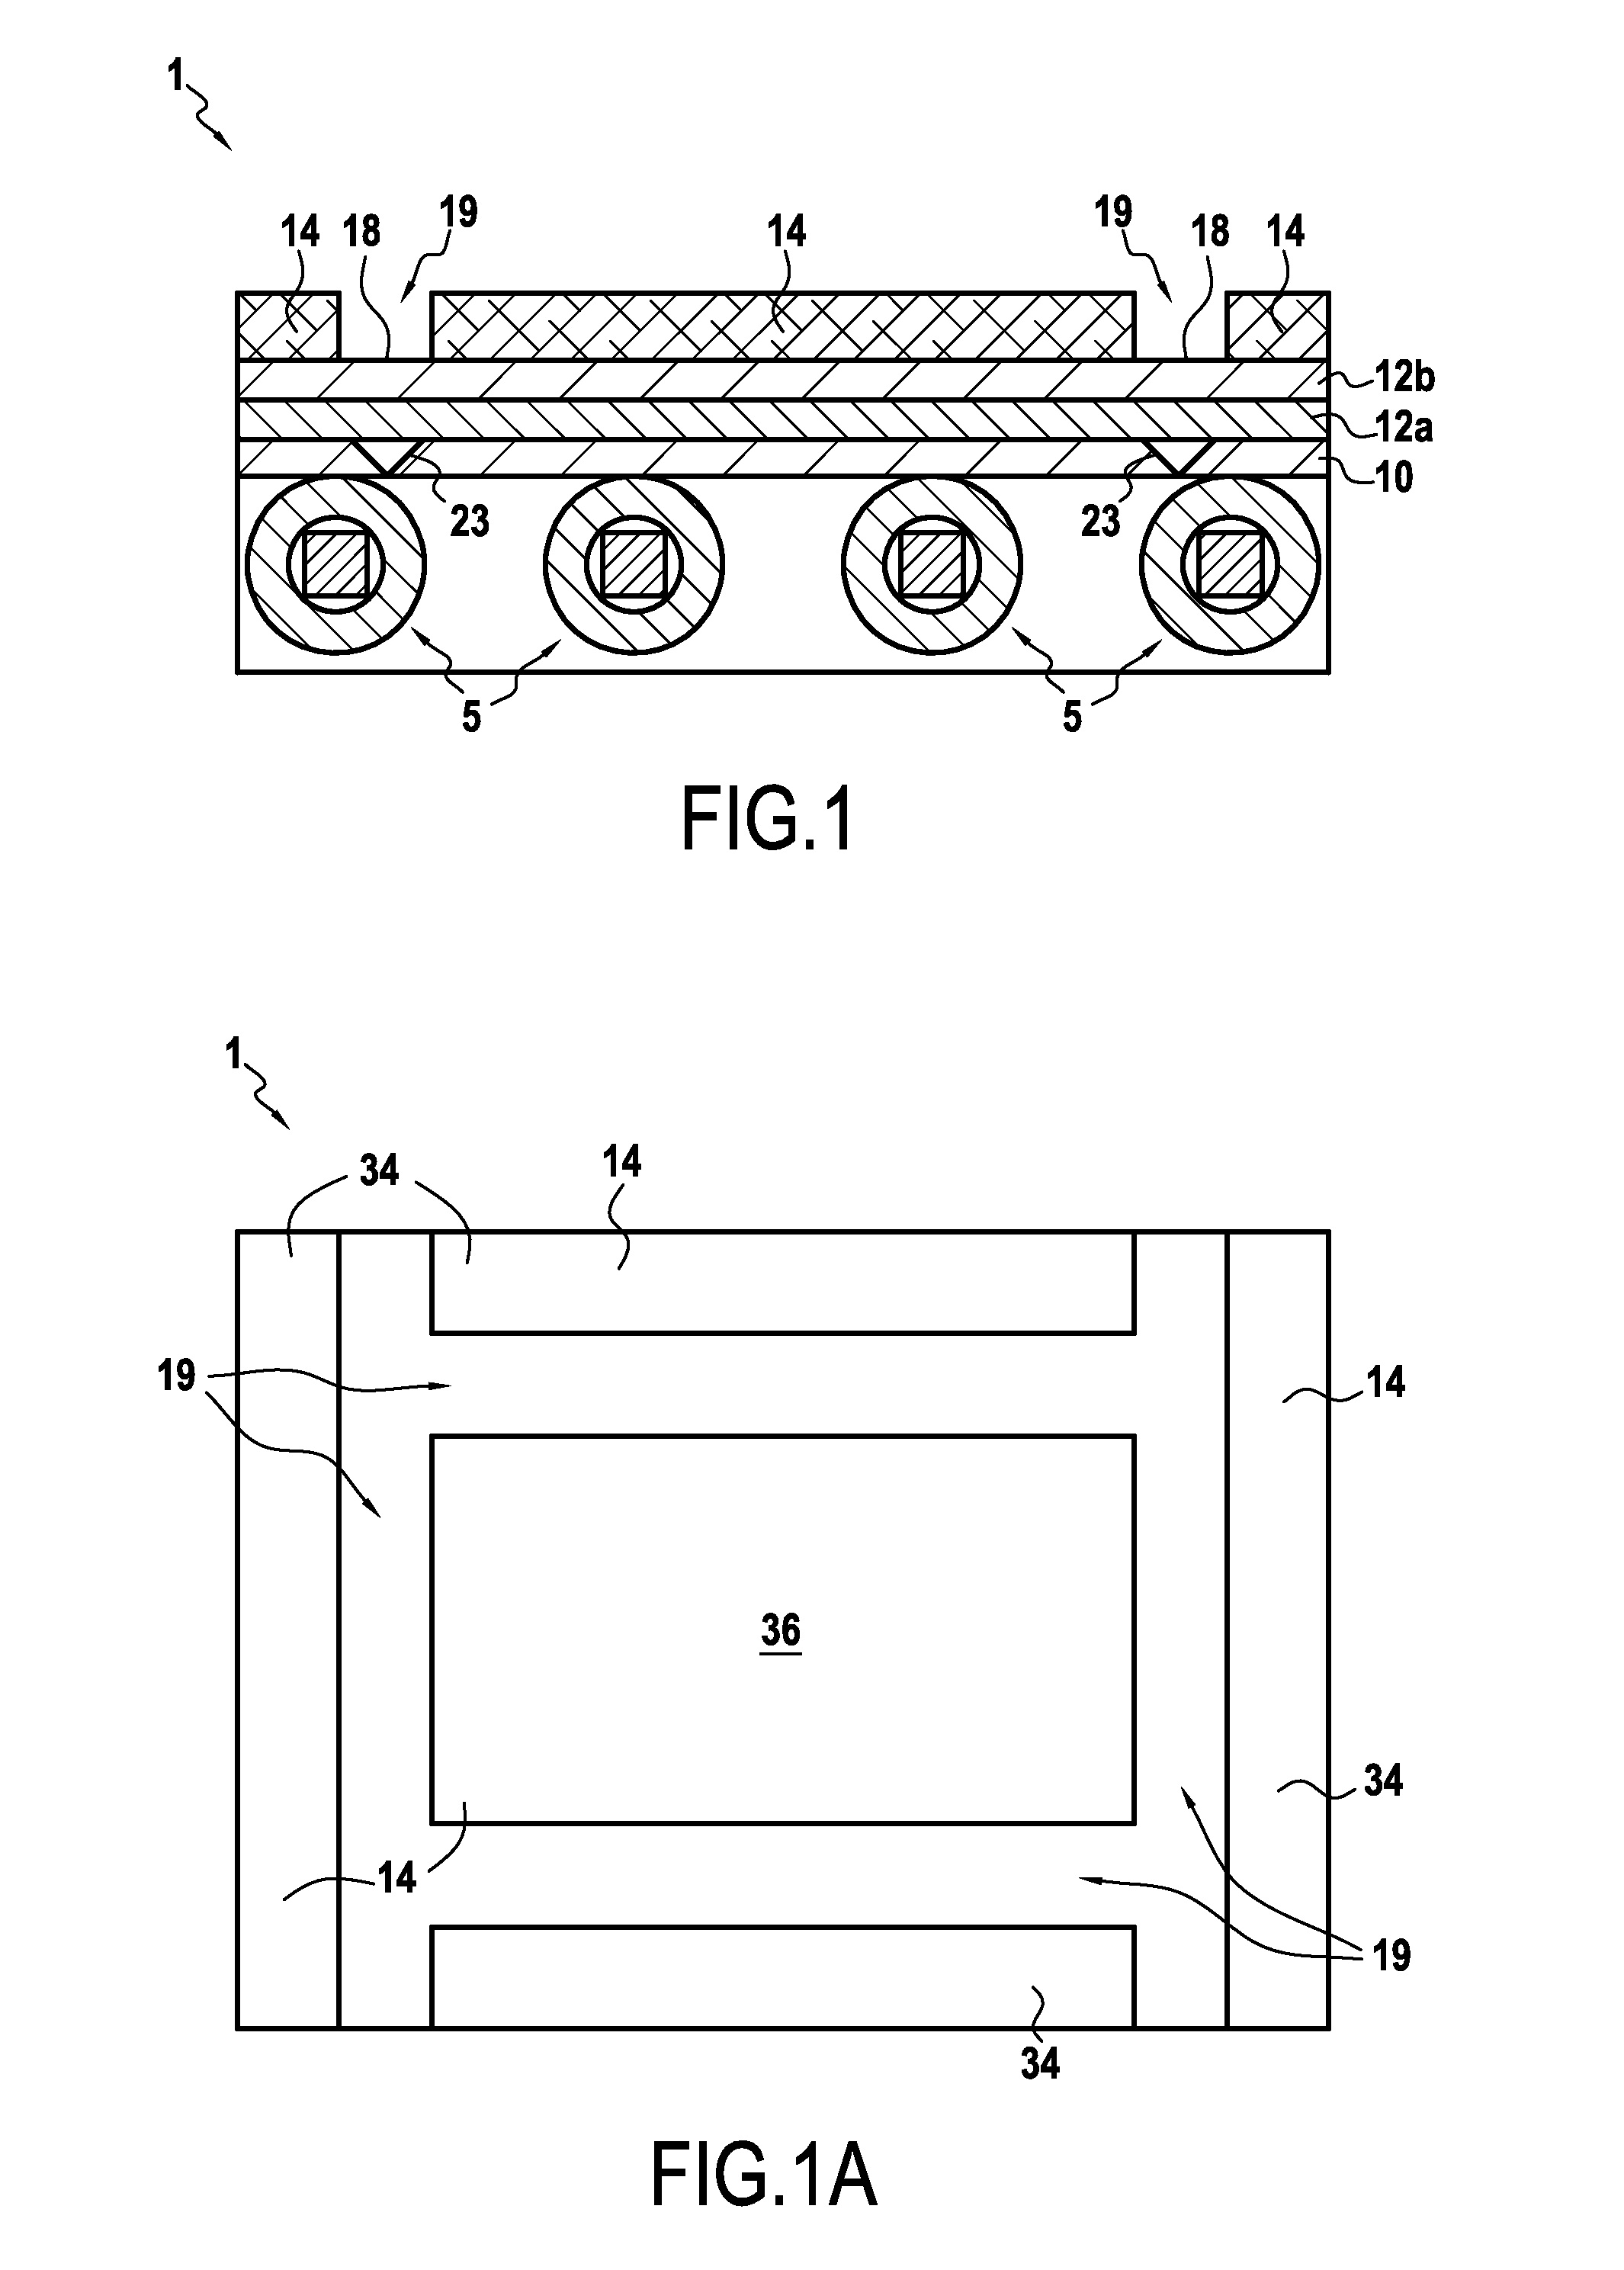 Systems and methods for welding